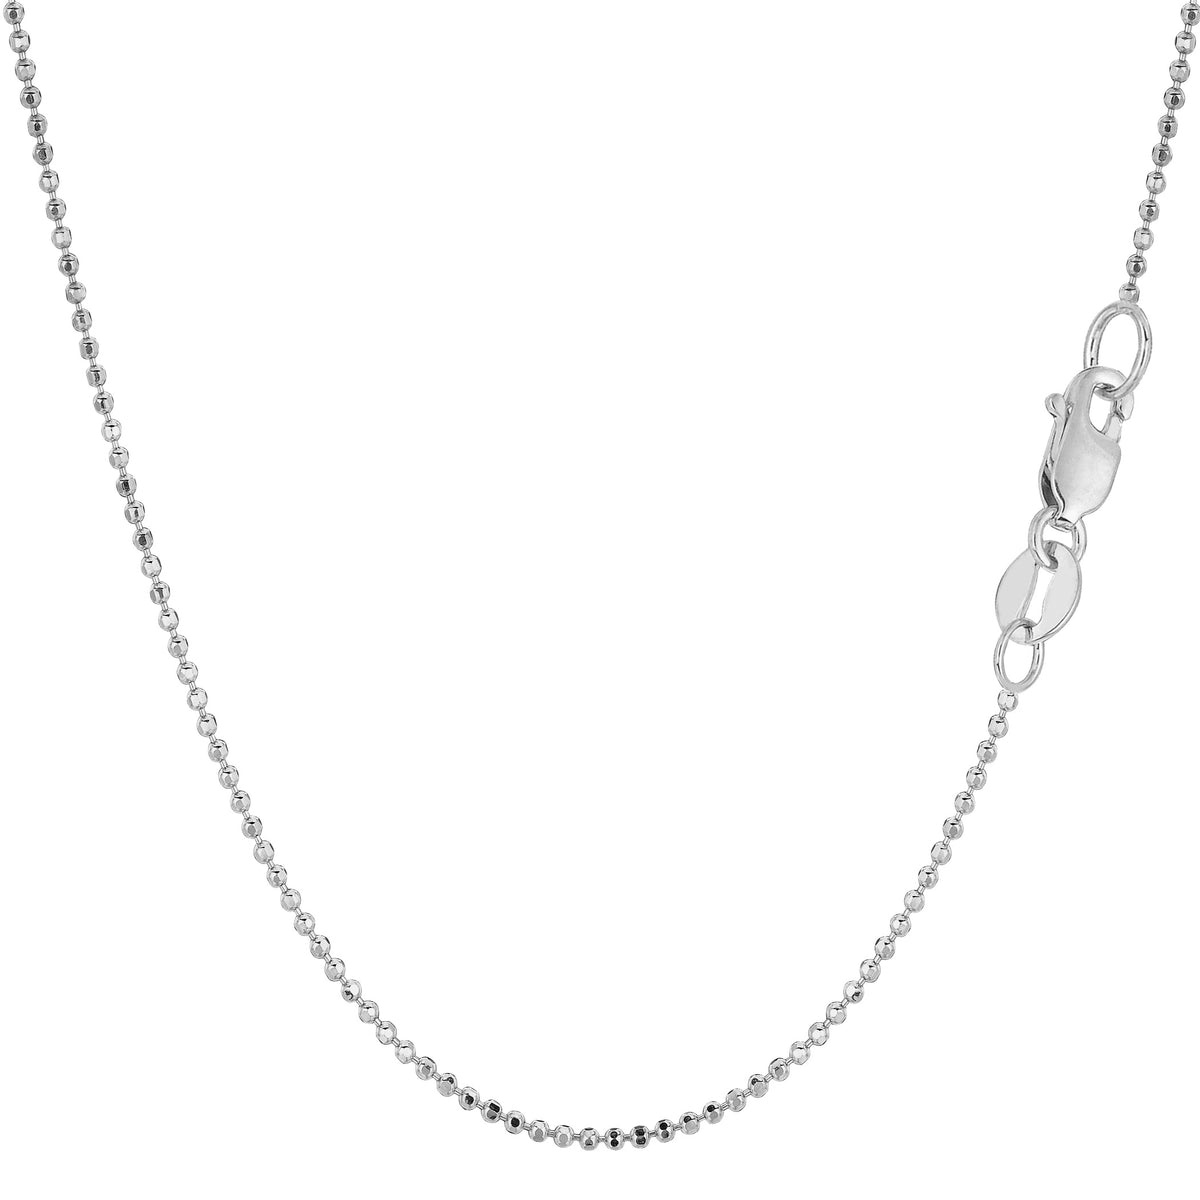 14k White Gold Diamond Cut Bead Chain Necklace, 1.2mm fine designer jewelry for men and women